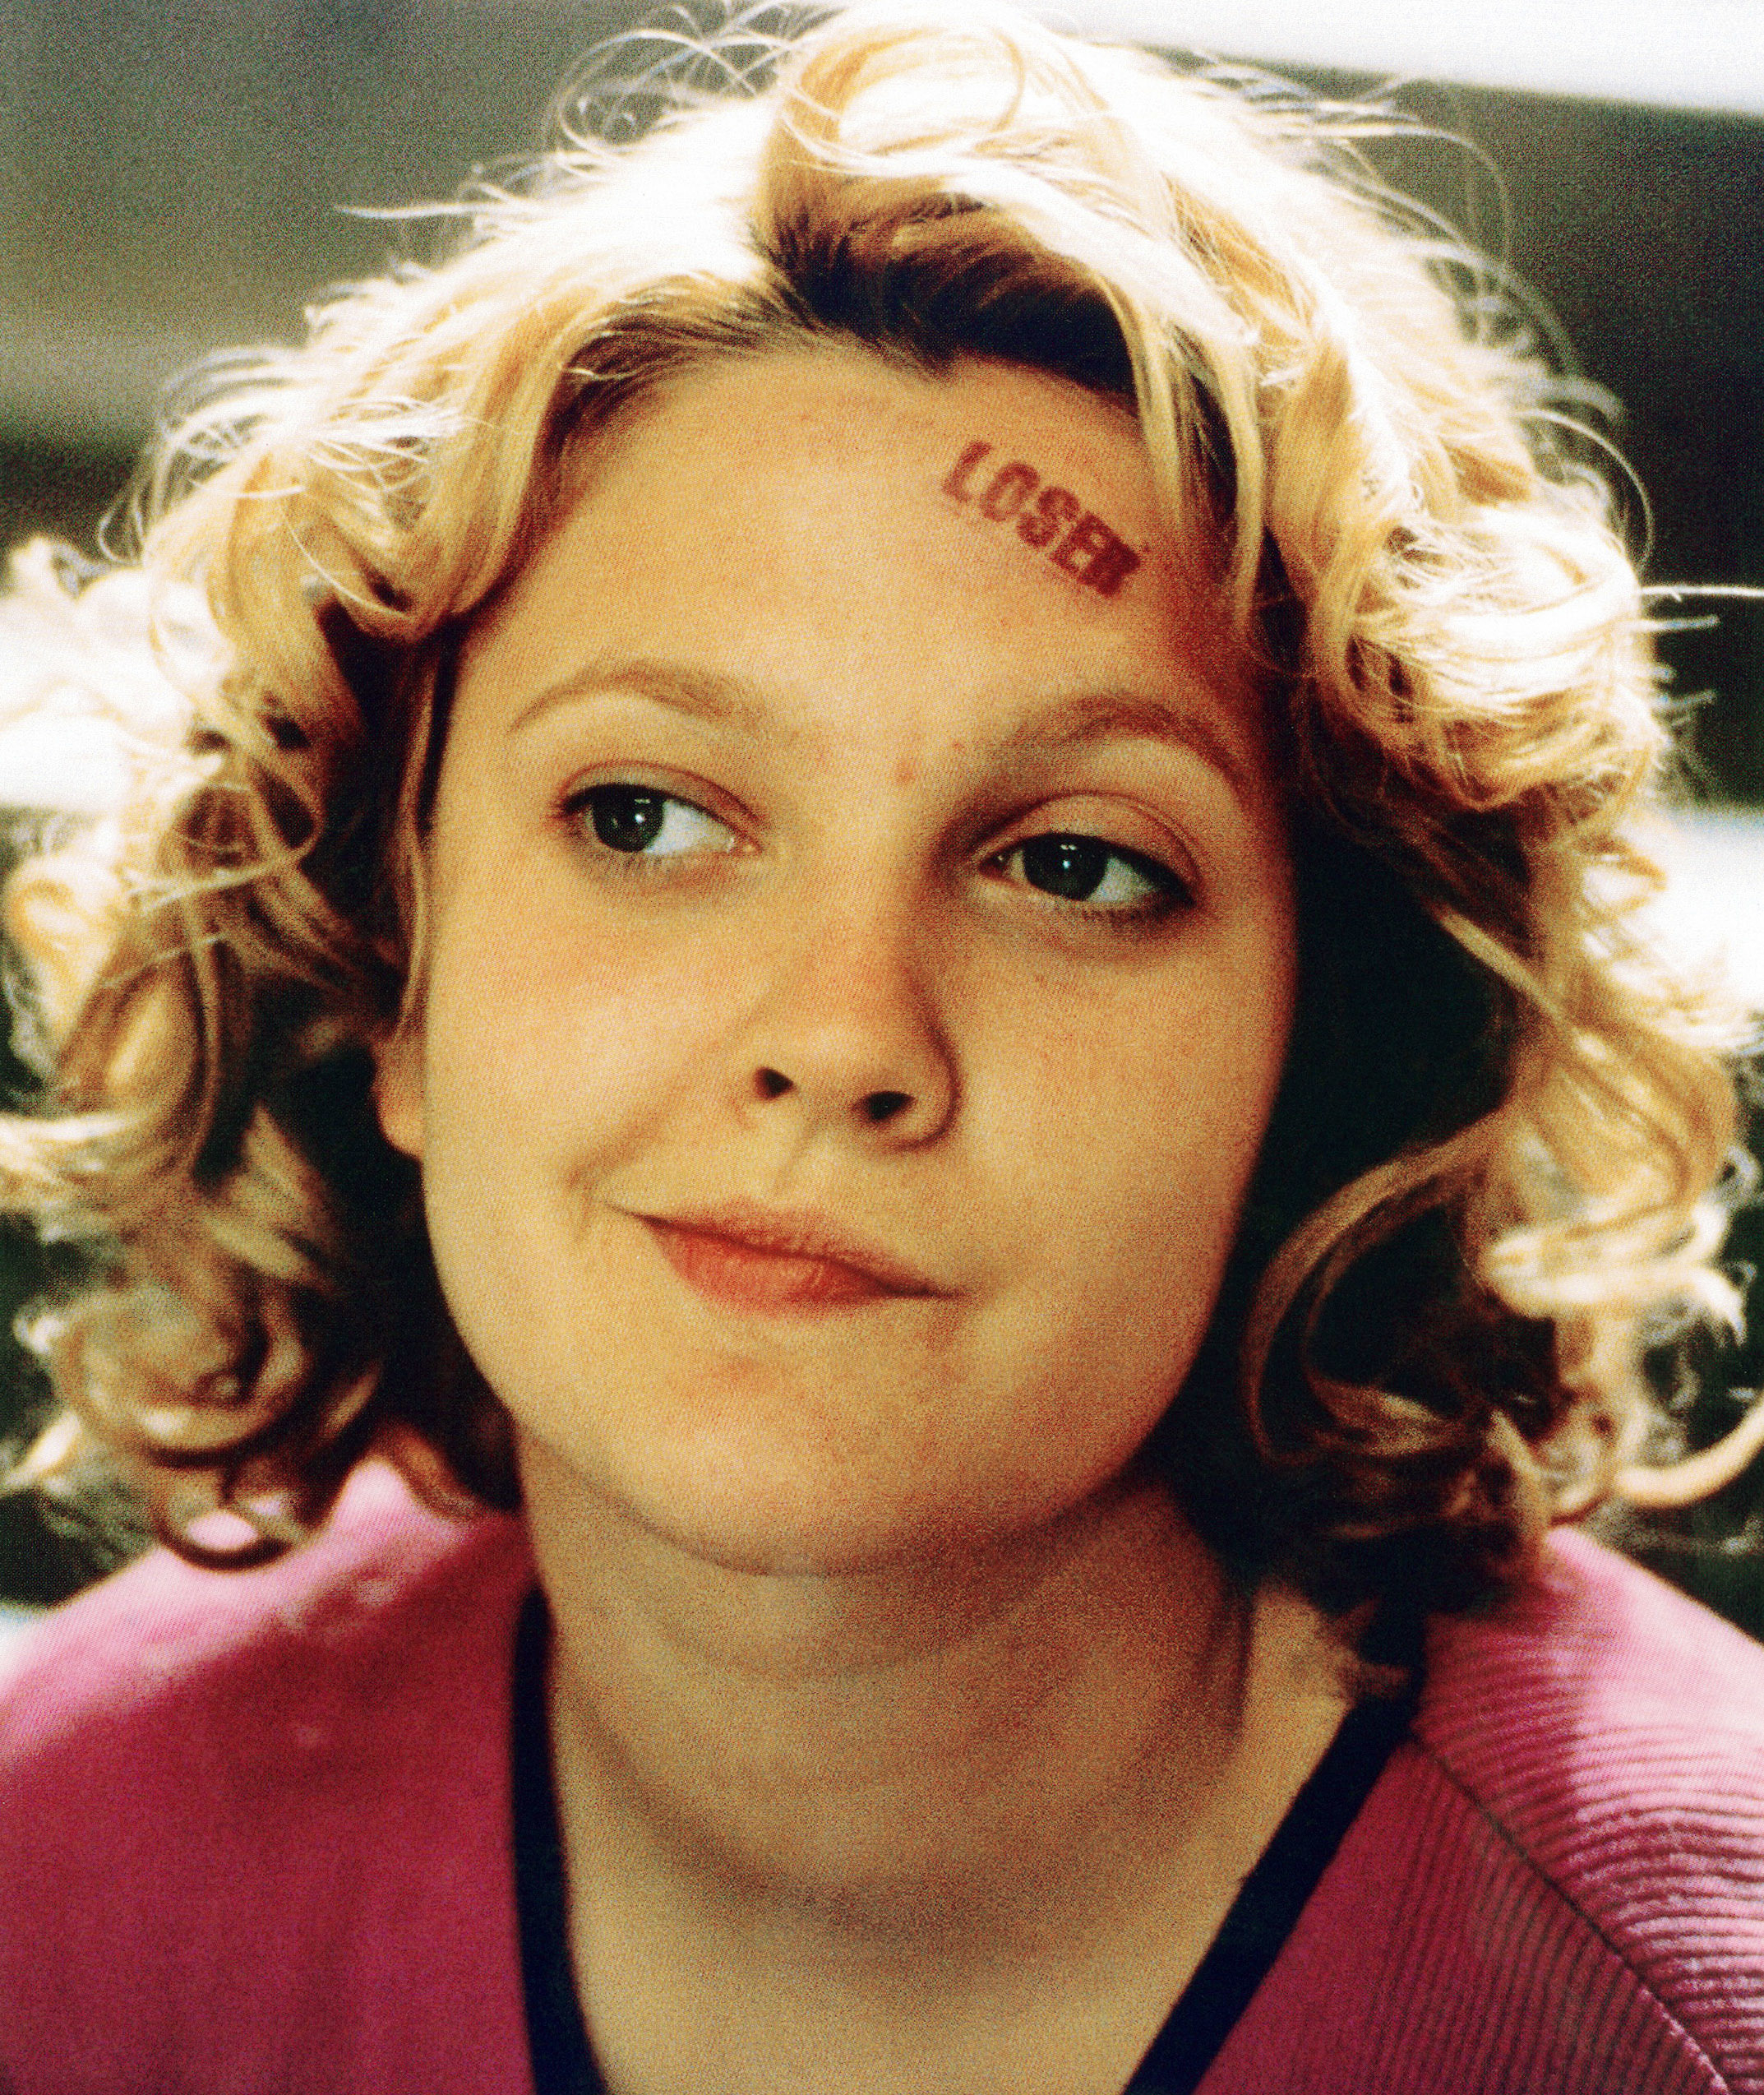 Drew Barrymore with the word &quot;LOSER&quot; stamped on her forehead in a scene from &quot;Never Been Kissed.&quot;